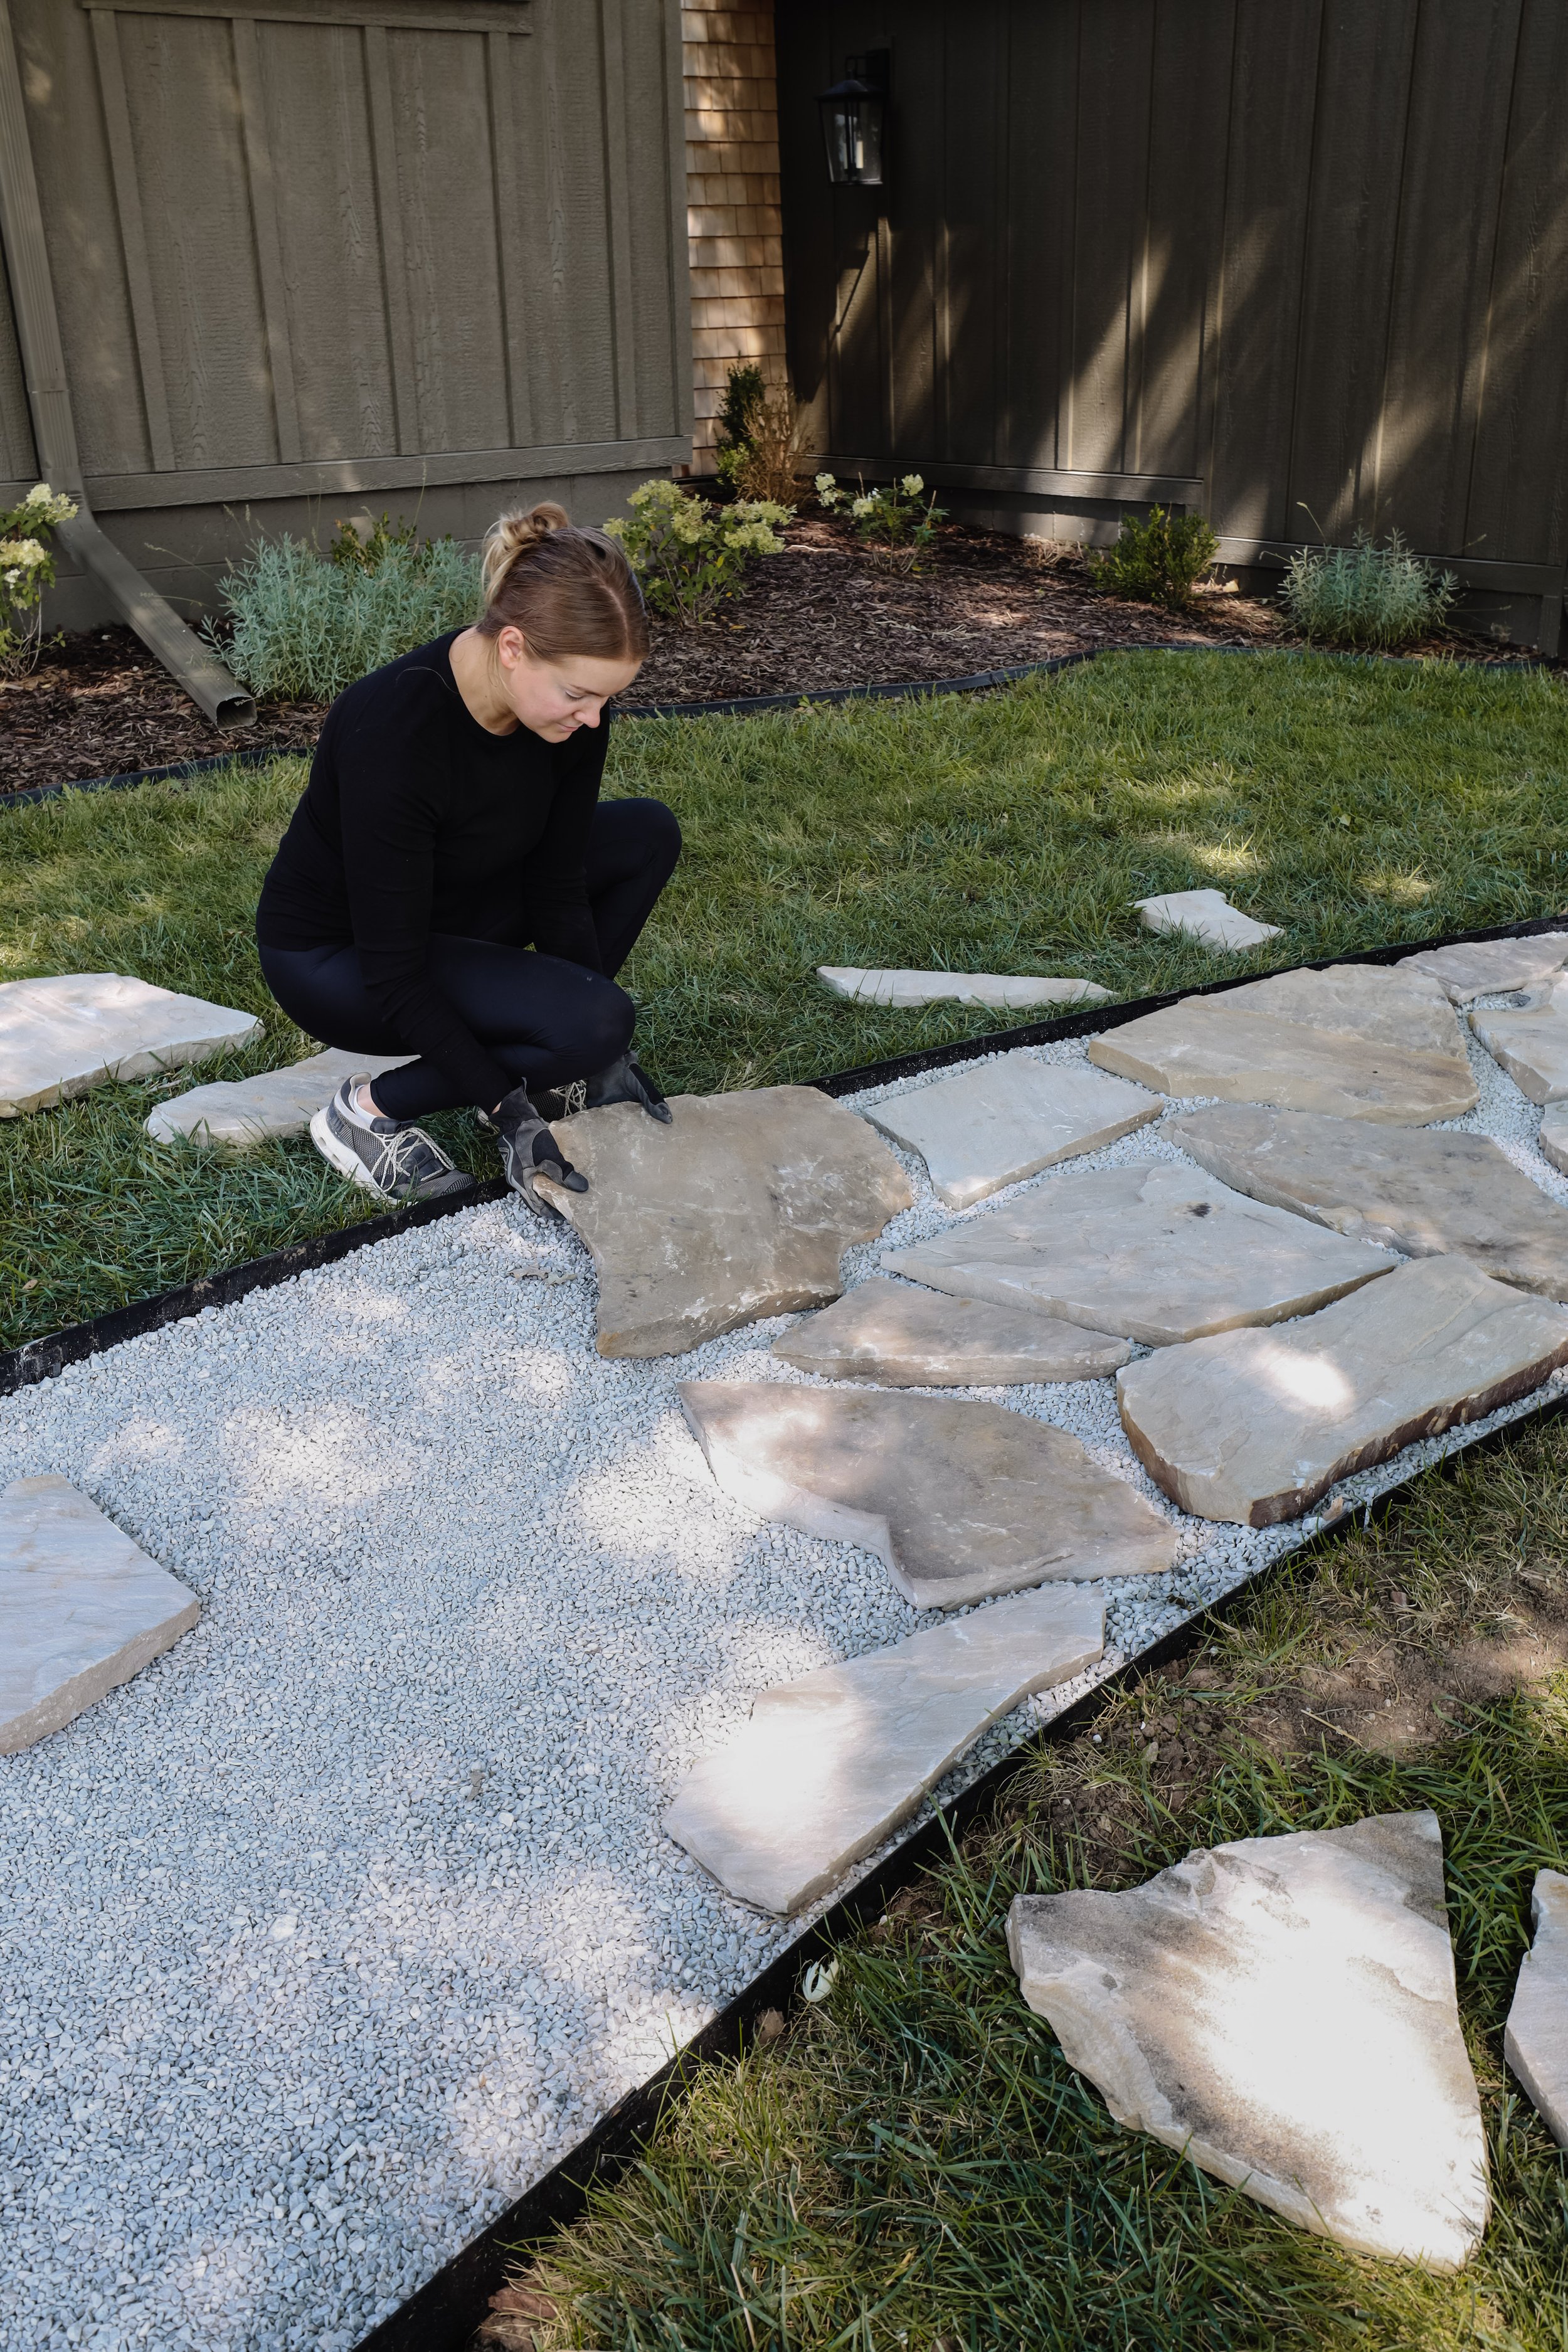 Our flagstone path to our front porch. How to install a flagstone path to your house. How to glue pea gravel path so it doesn't scatter. Organic shaped flagstone path with limestone chips. Blue and orange flagstones. | Nadine Stay